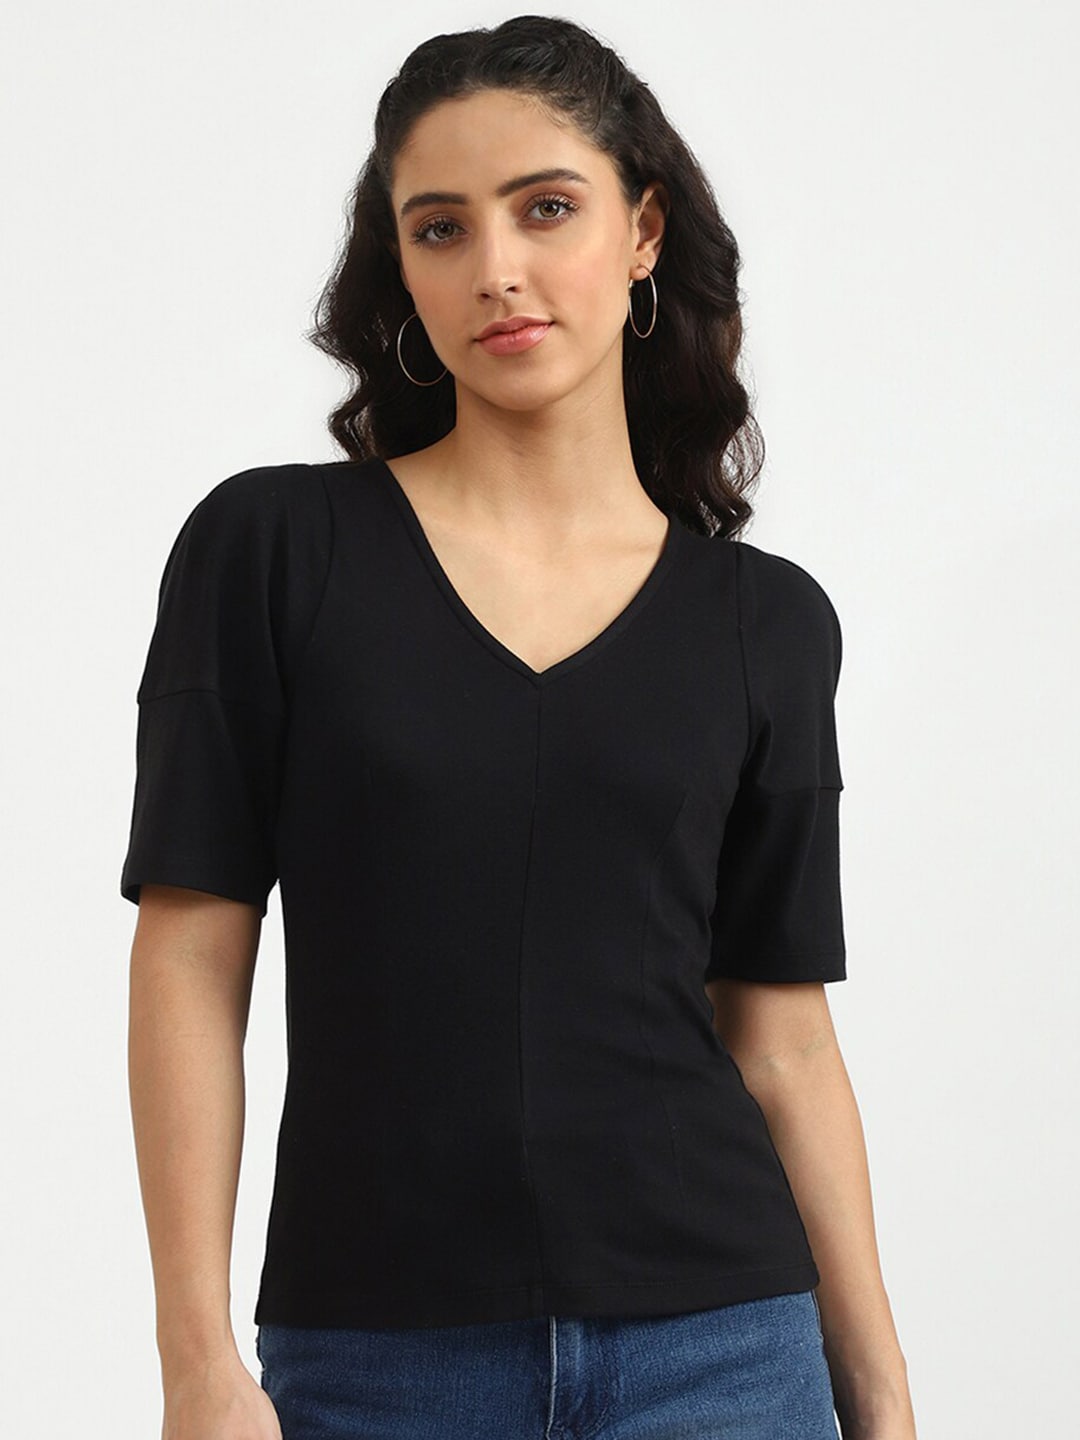 United Colors of Benetton Black Solid Top Price in India